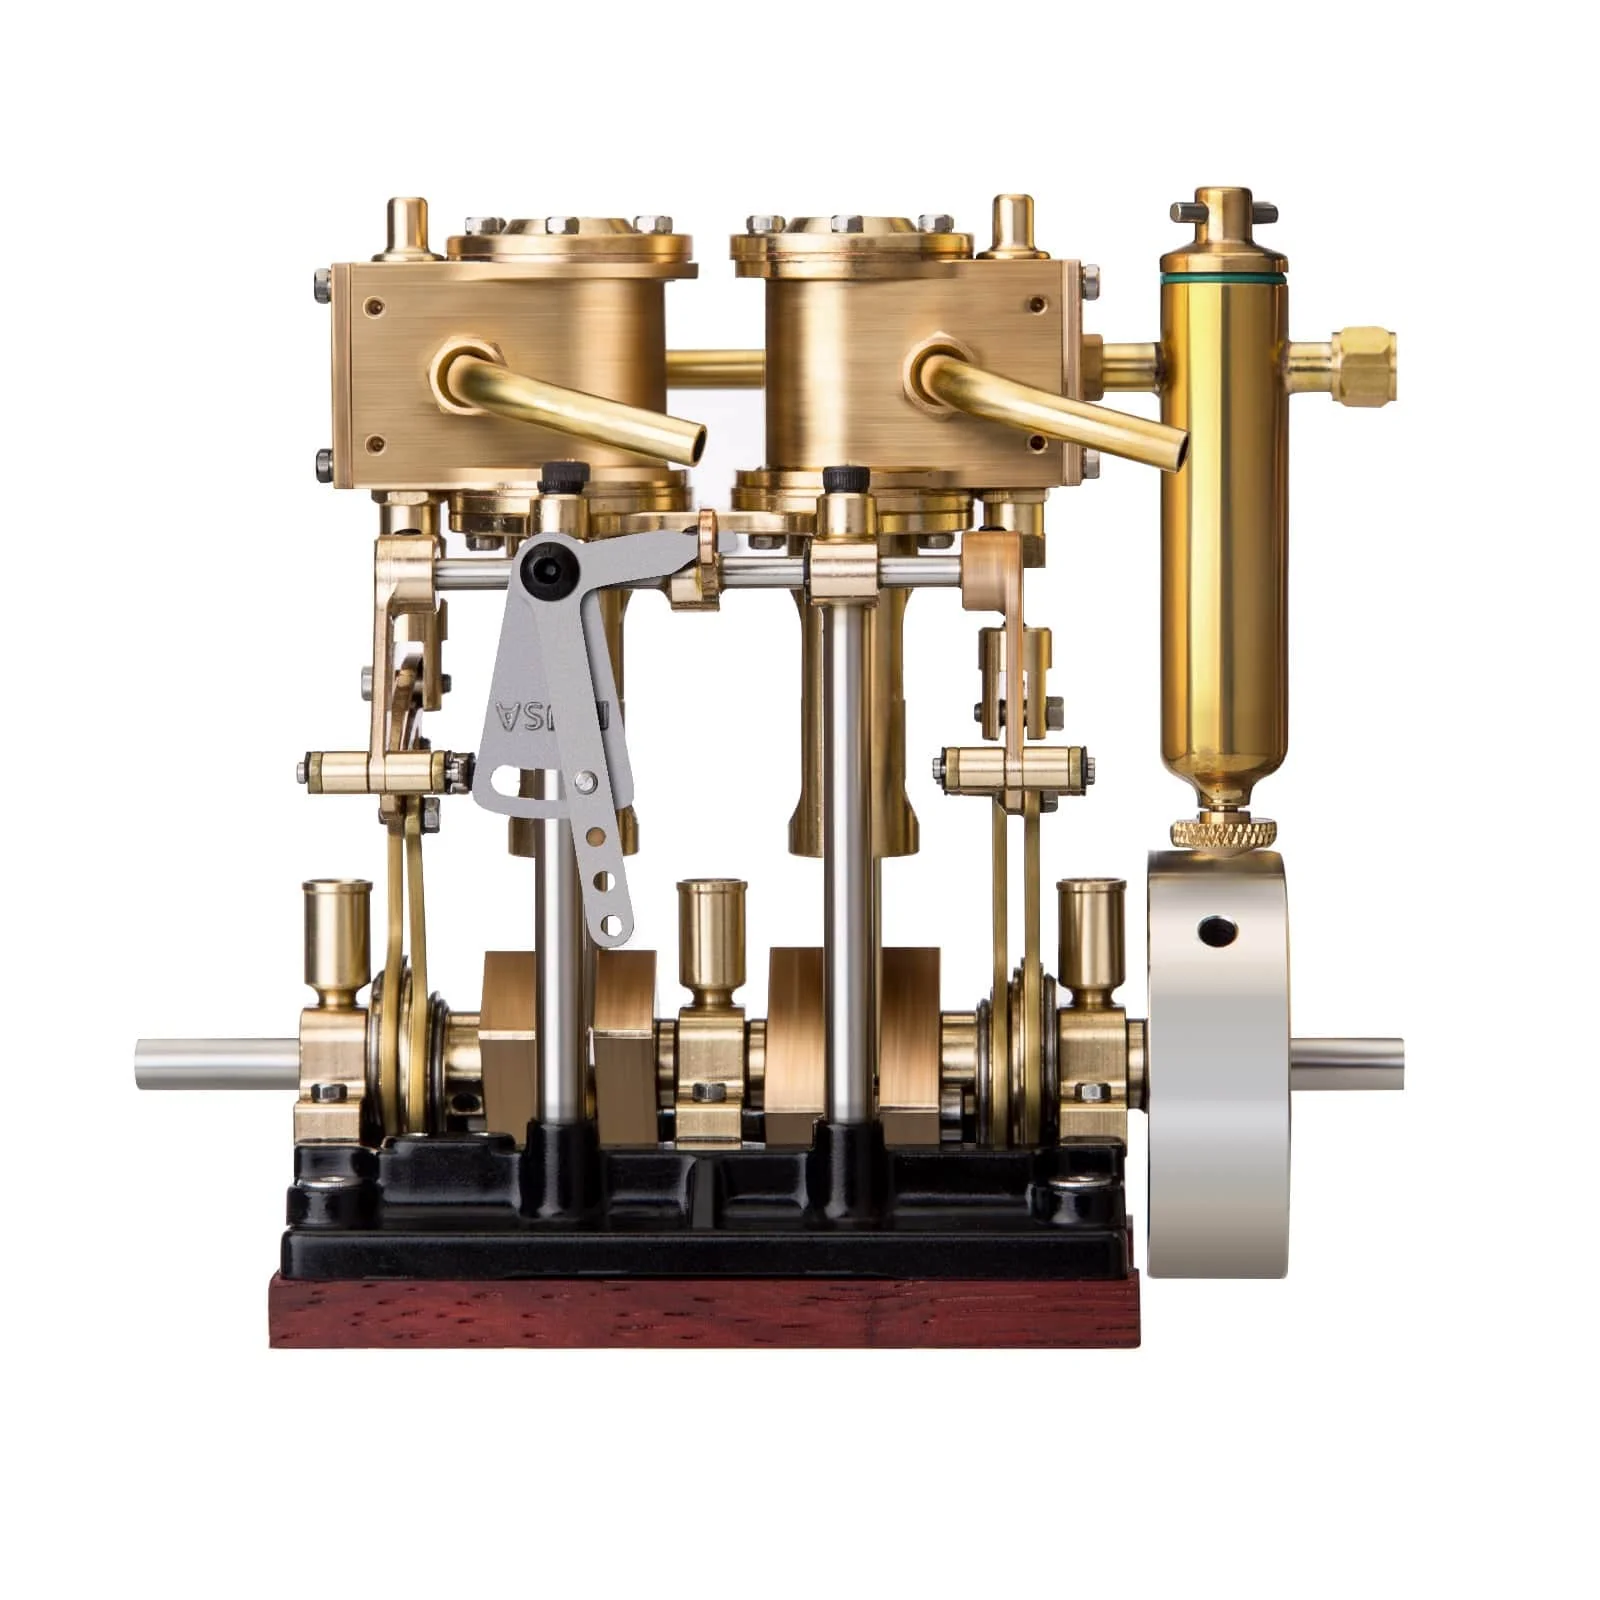 KACIO LS2-13S Two Cylinder Reciprocating Steam Engine Model for 80-120CM Steamship 1